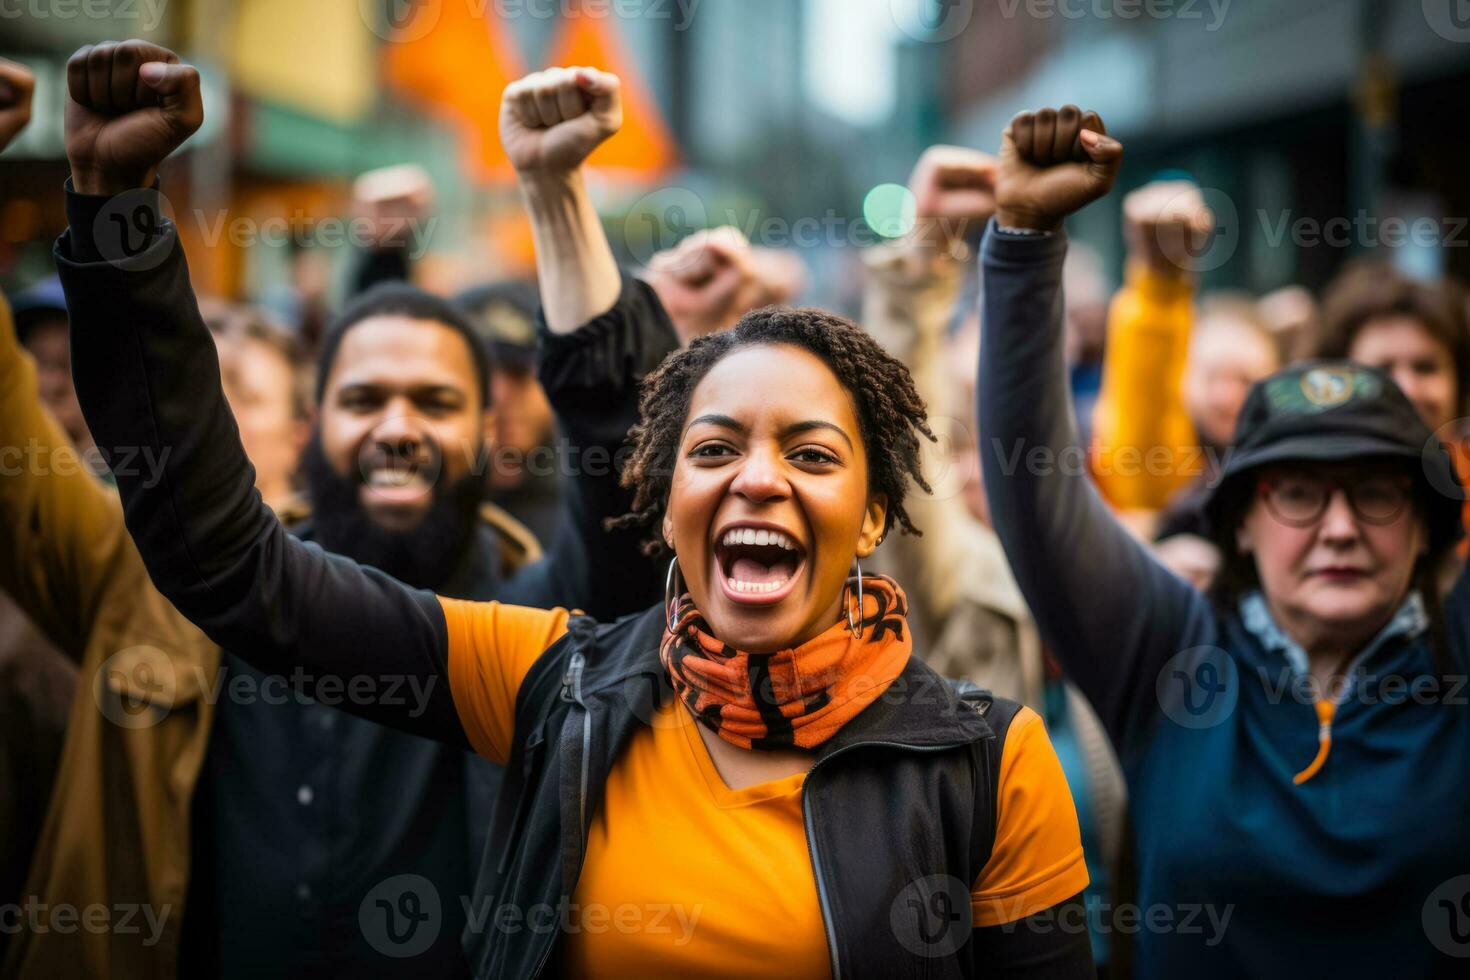 Strikers raise their fists in unison a powerful symbol of their shared purpose photo